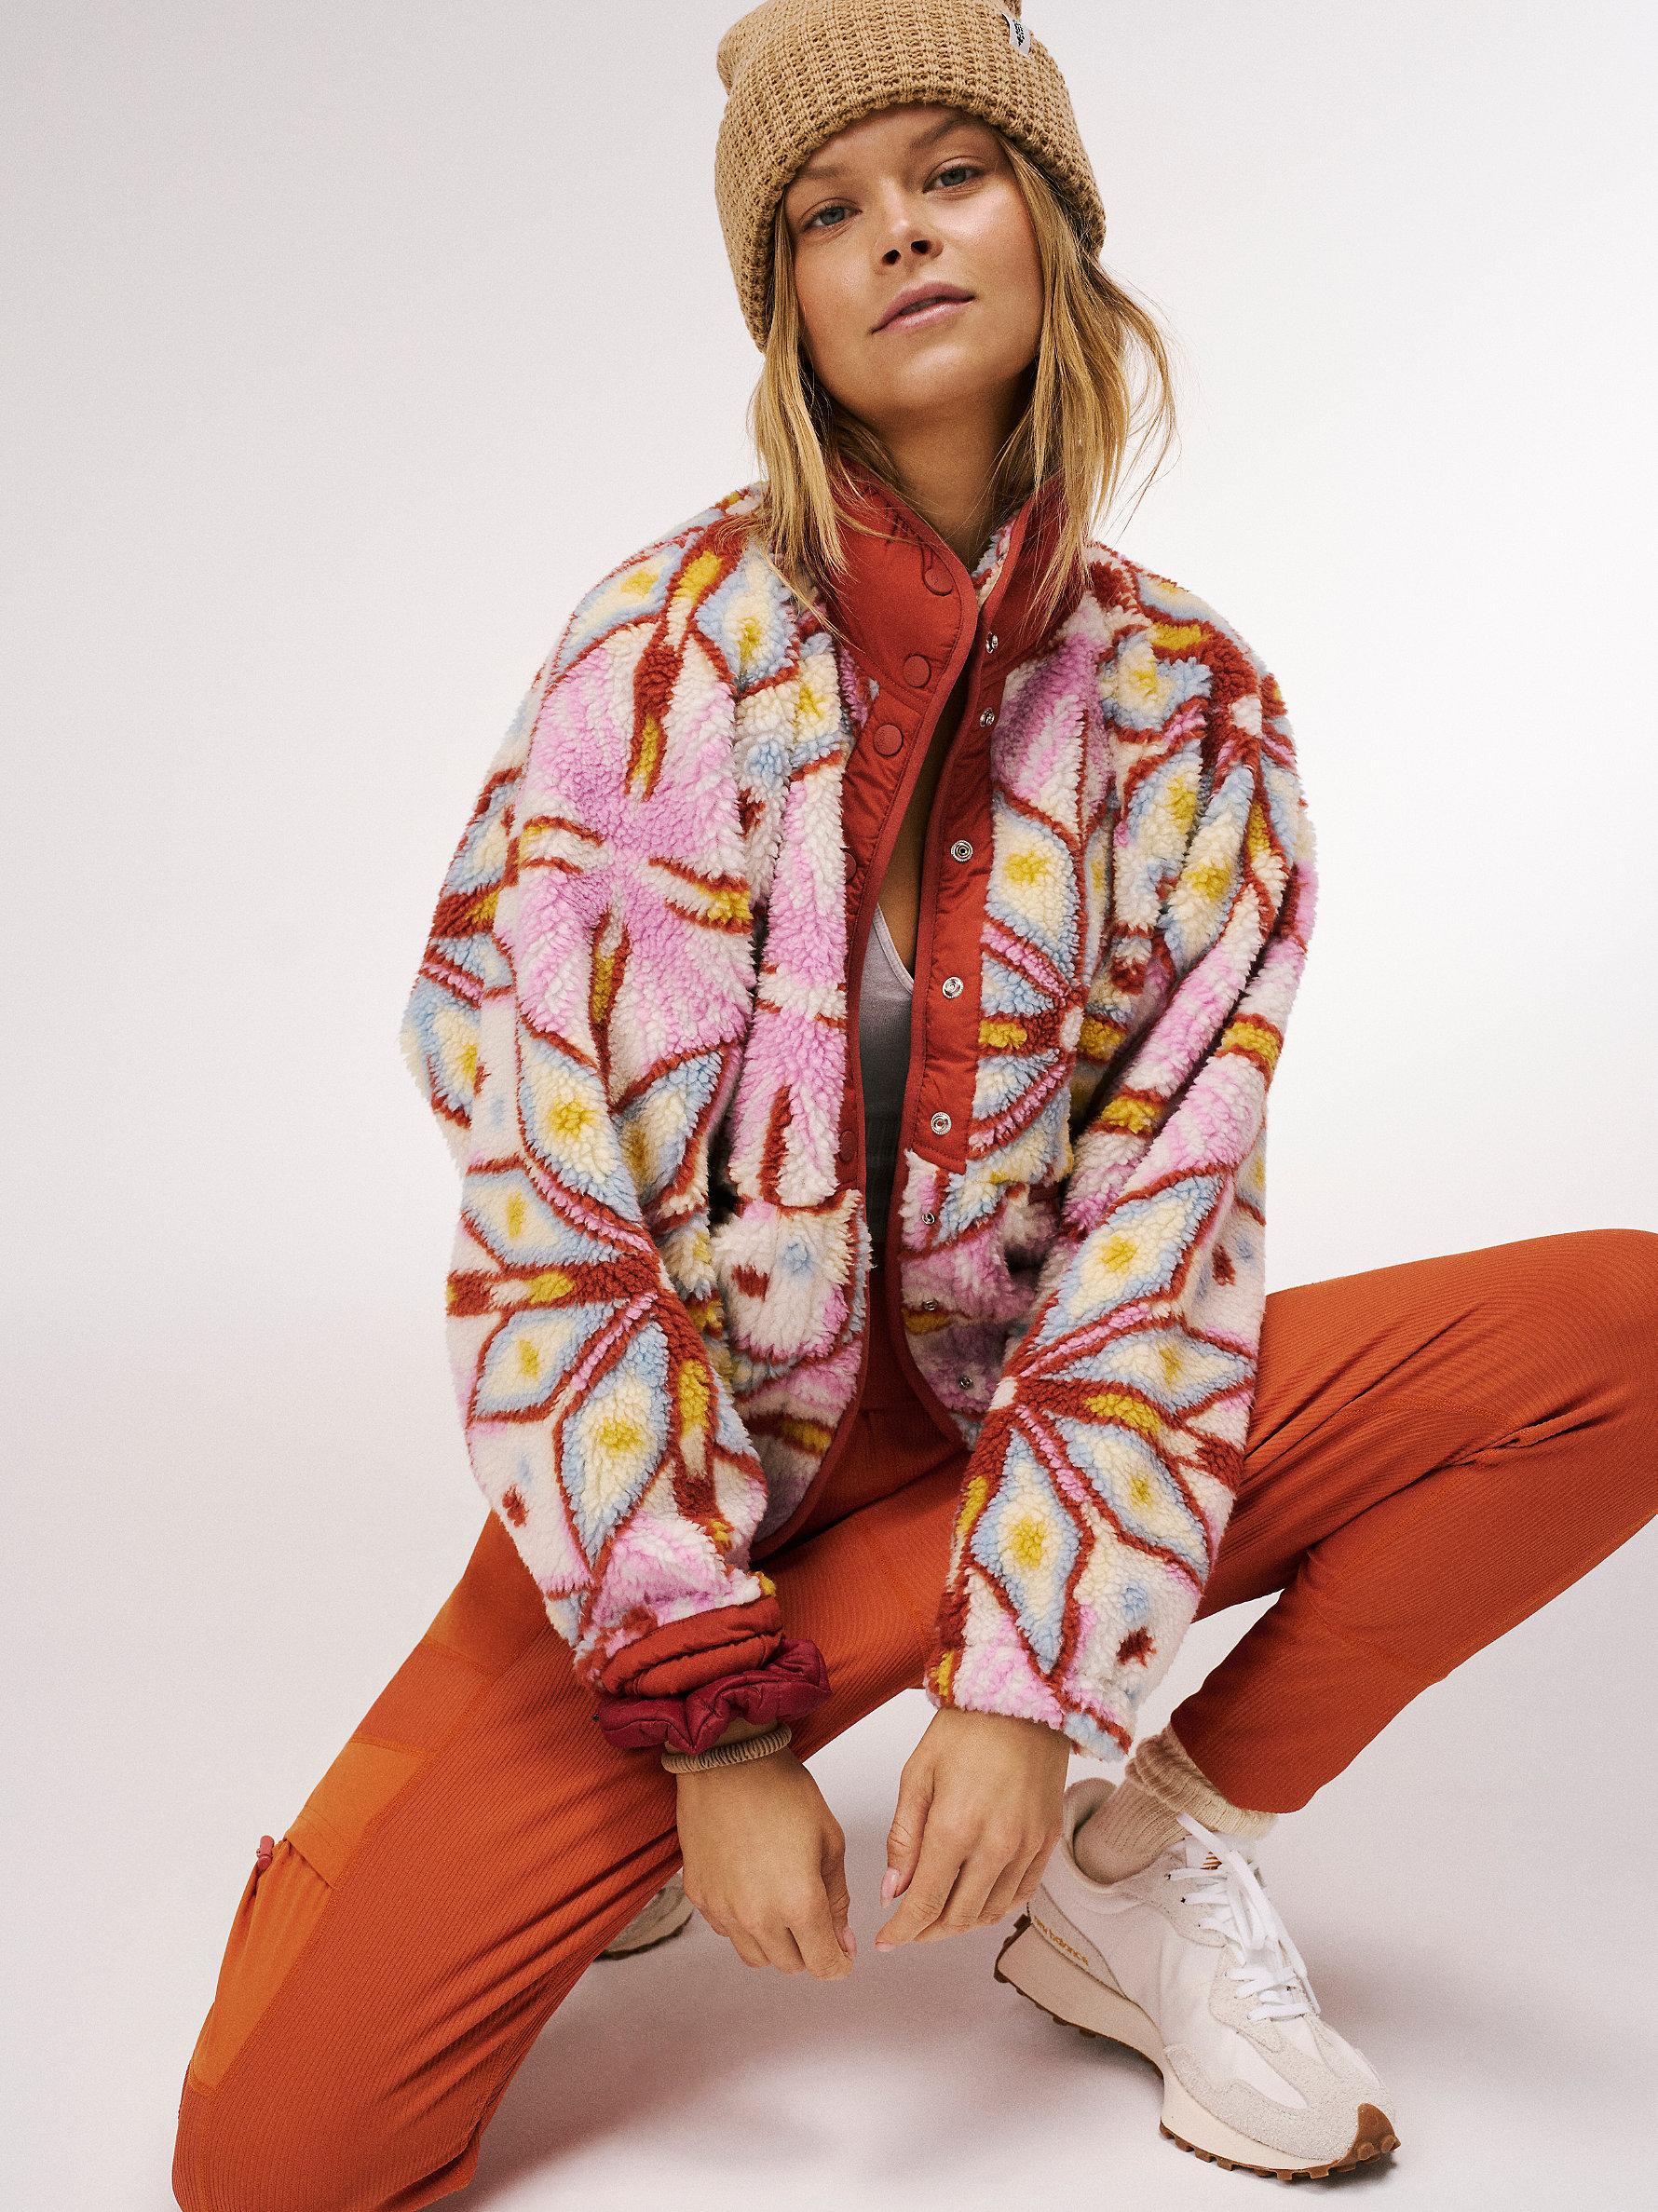 https://cdna.lystit.com/photos/freepeople/bc20c8ca/free-people-Moonglow-Combo-Hit-The-Slopes-Printed-Fleece-Jacket.jpeg